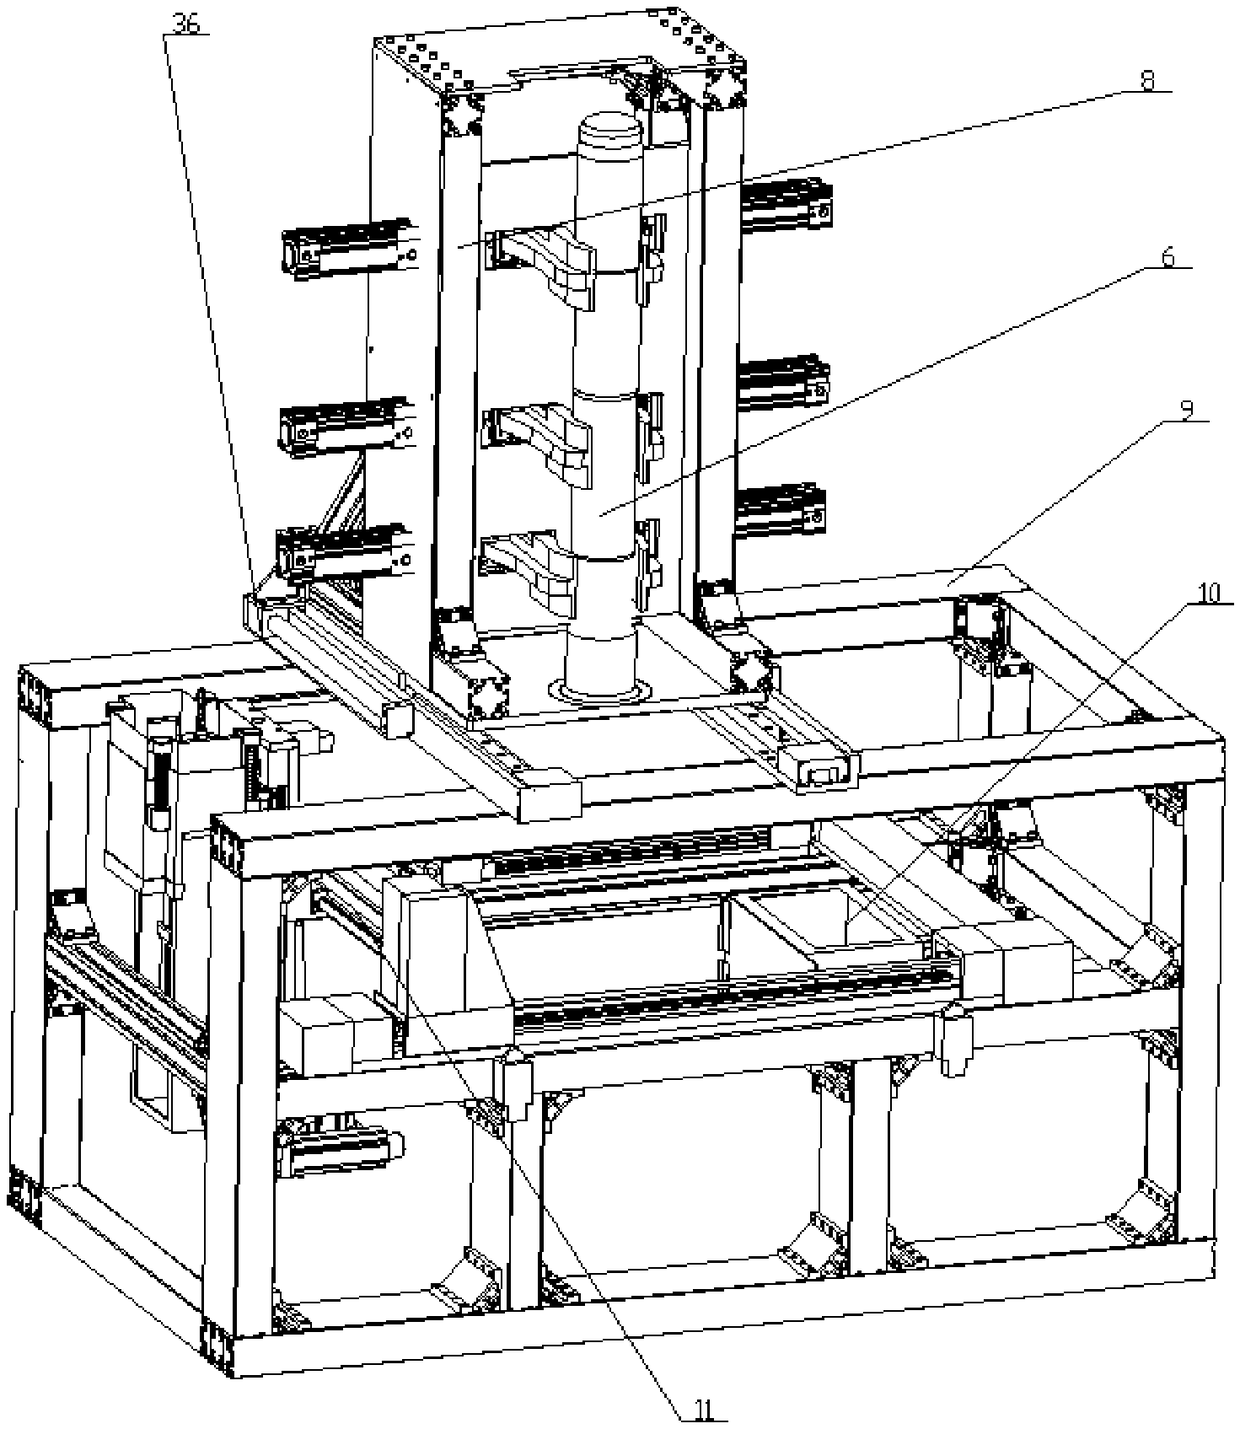 Drilling and shaping device of a coated explosive column